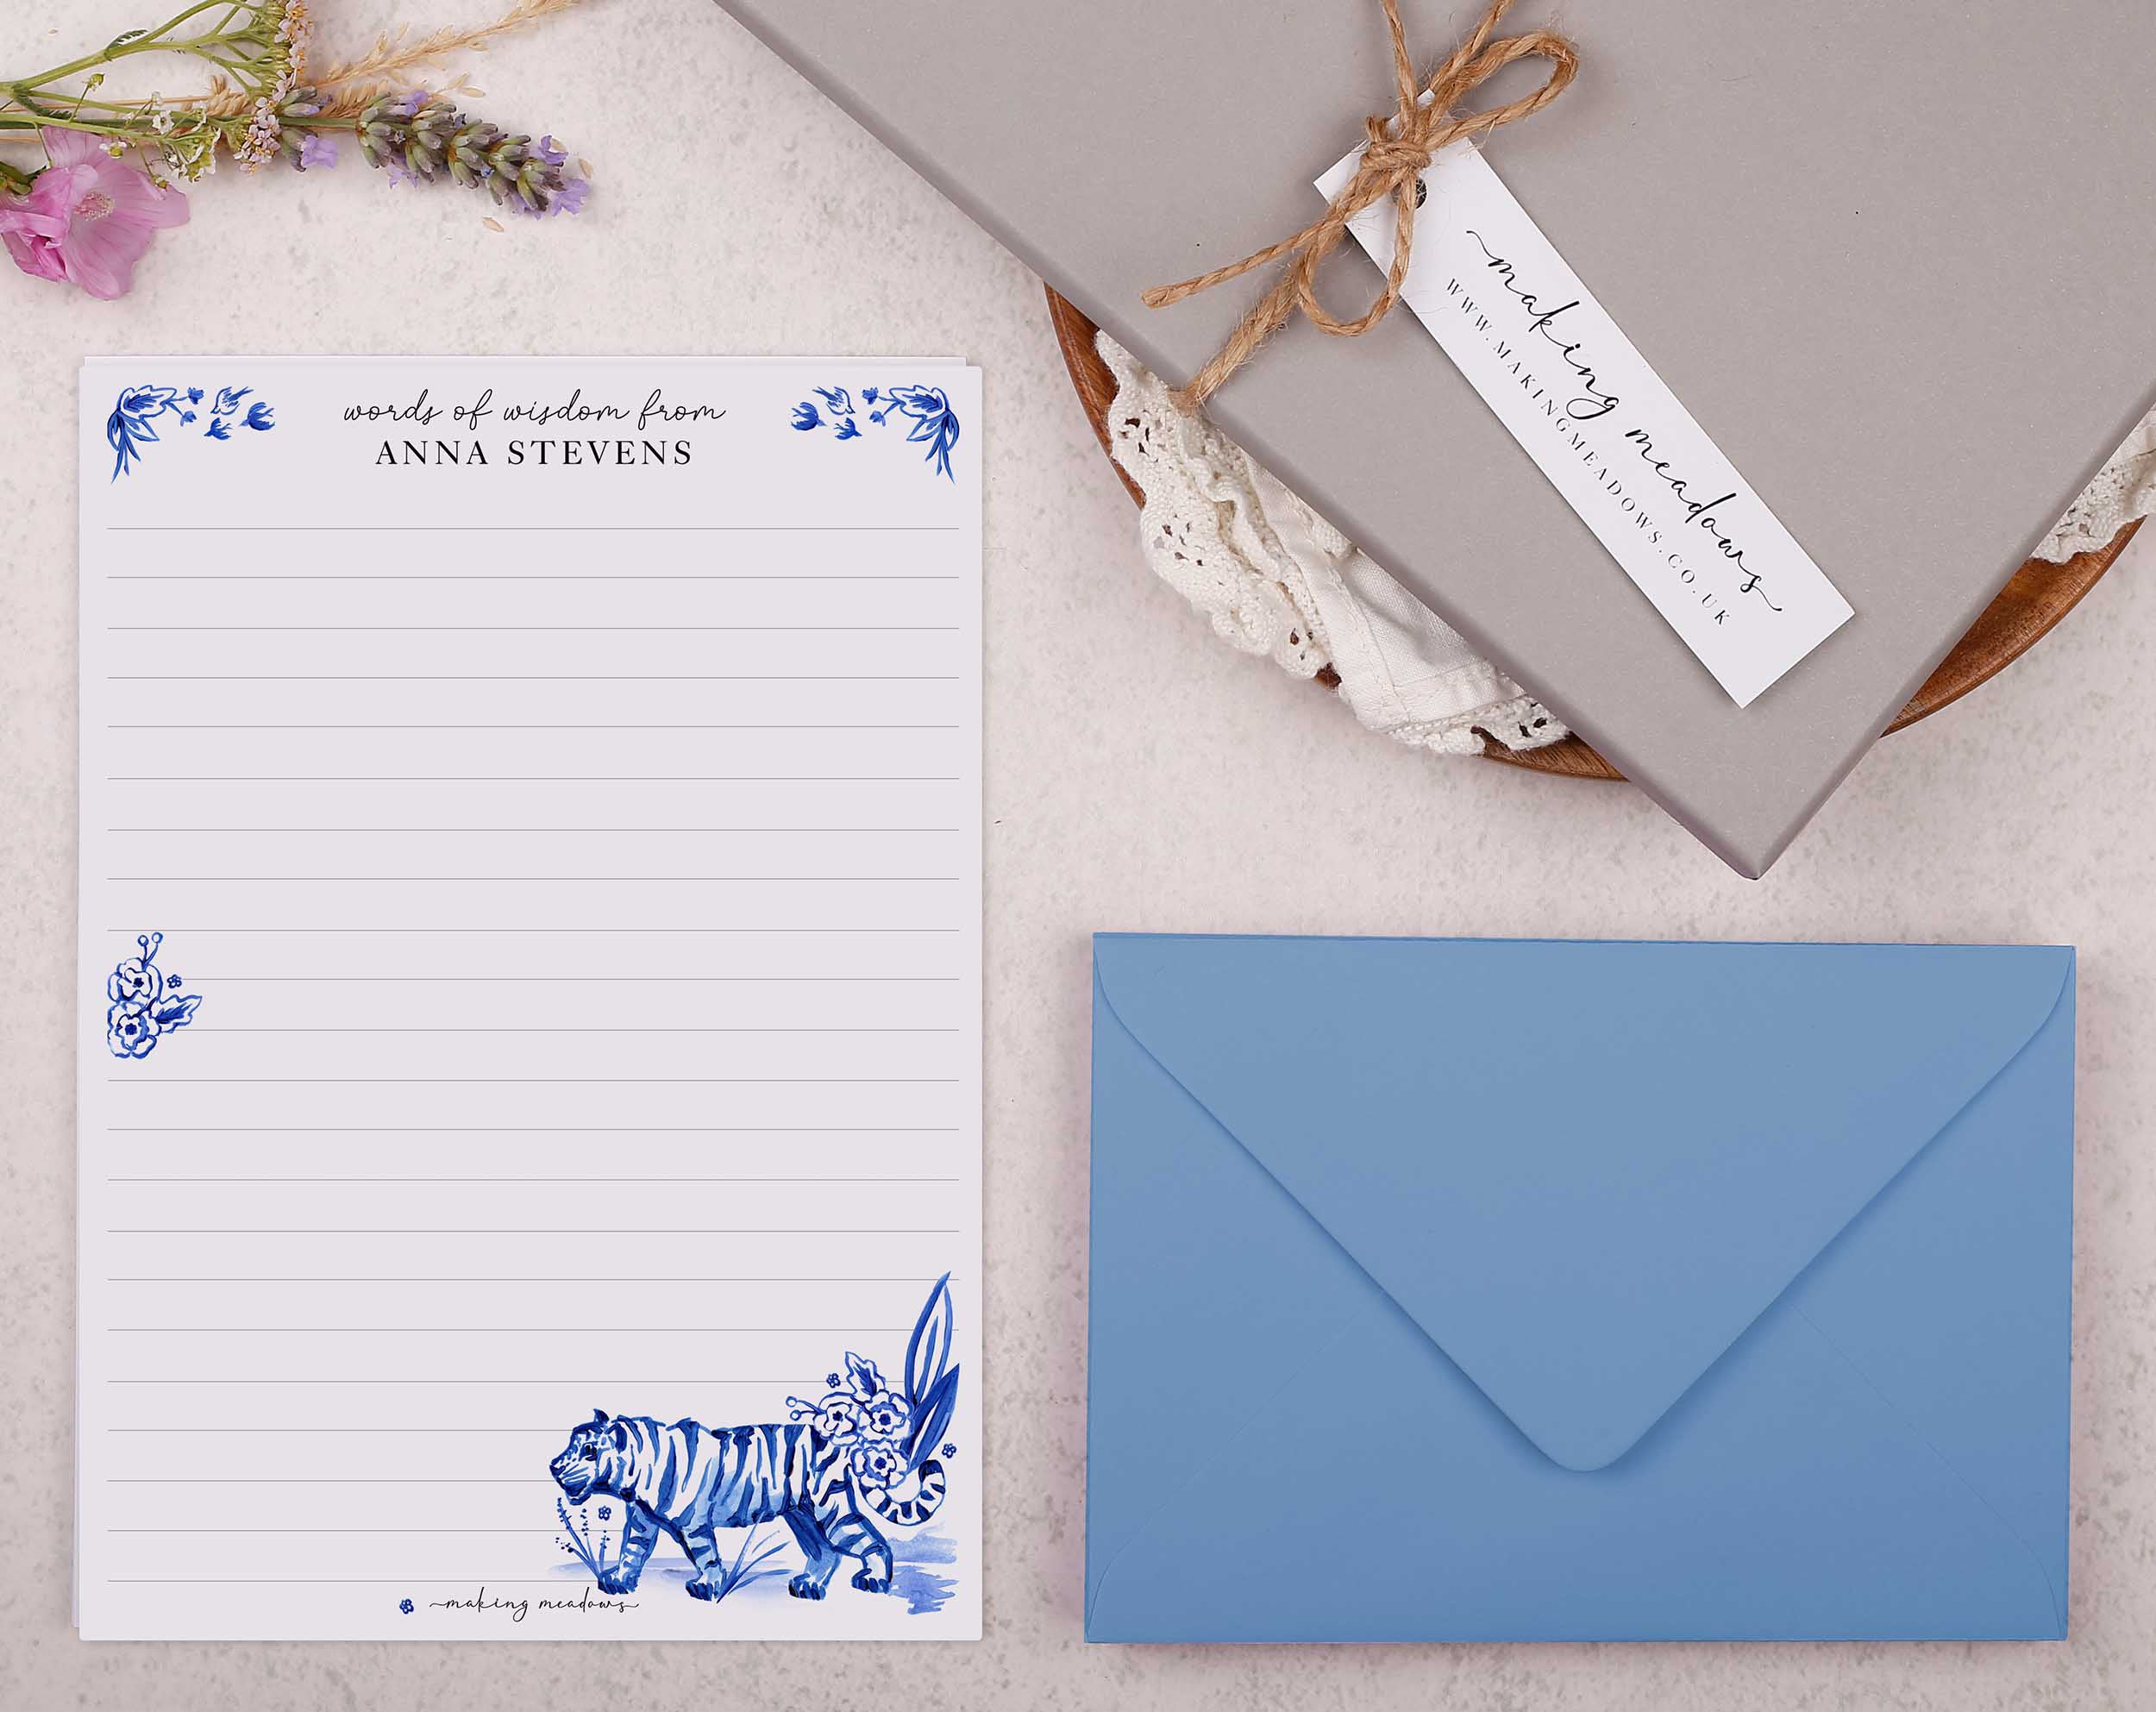 Premium personalised A5 letter writing paper set with a handpainted watercolour tiger and floral border in a china blue porcelain design.